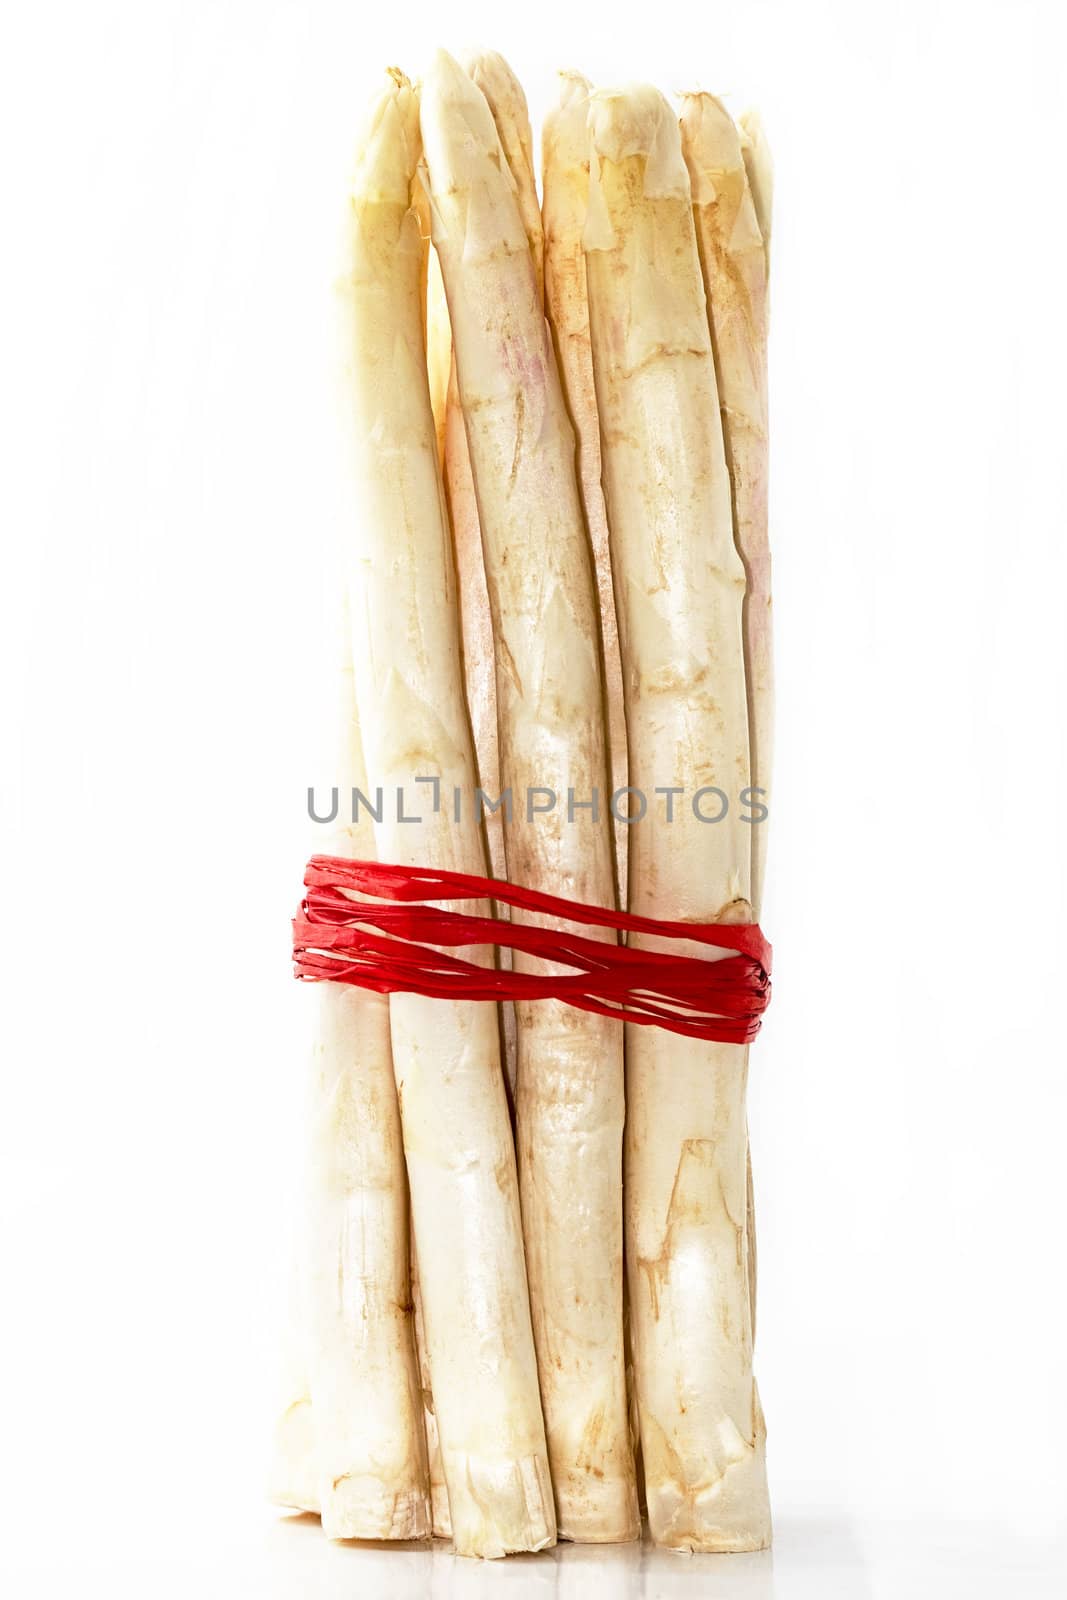 a bundle of white asparagus on white background